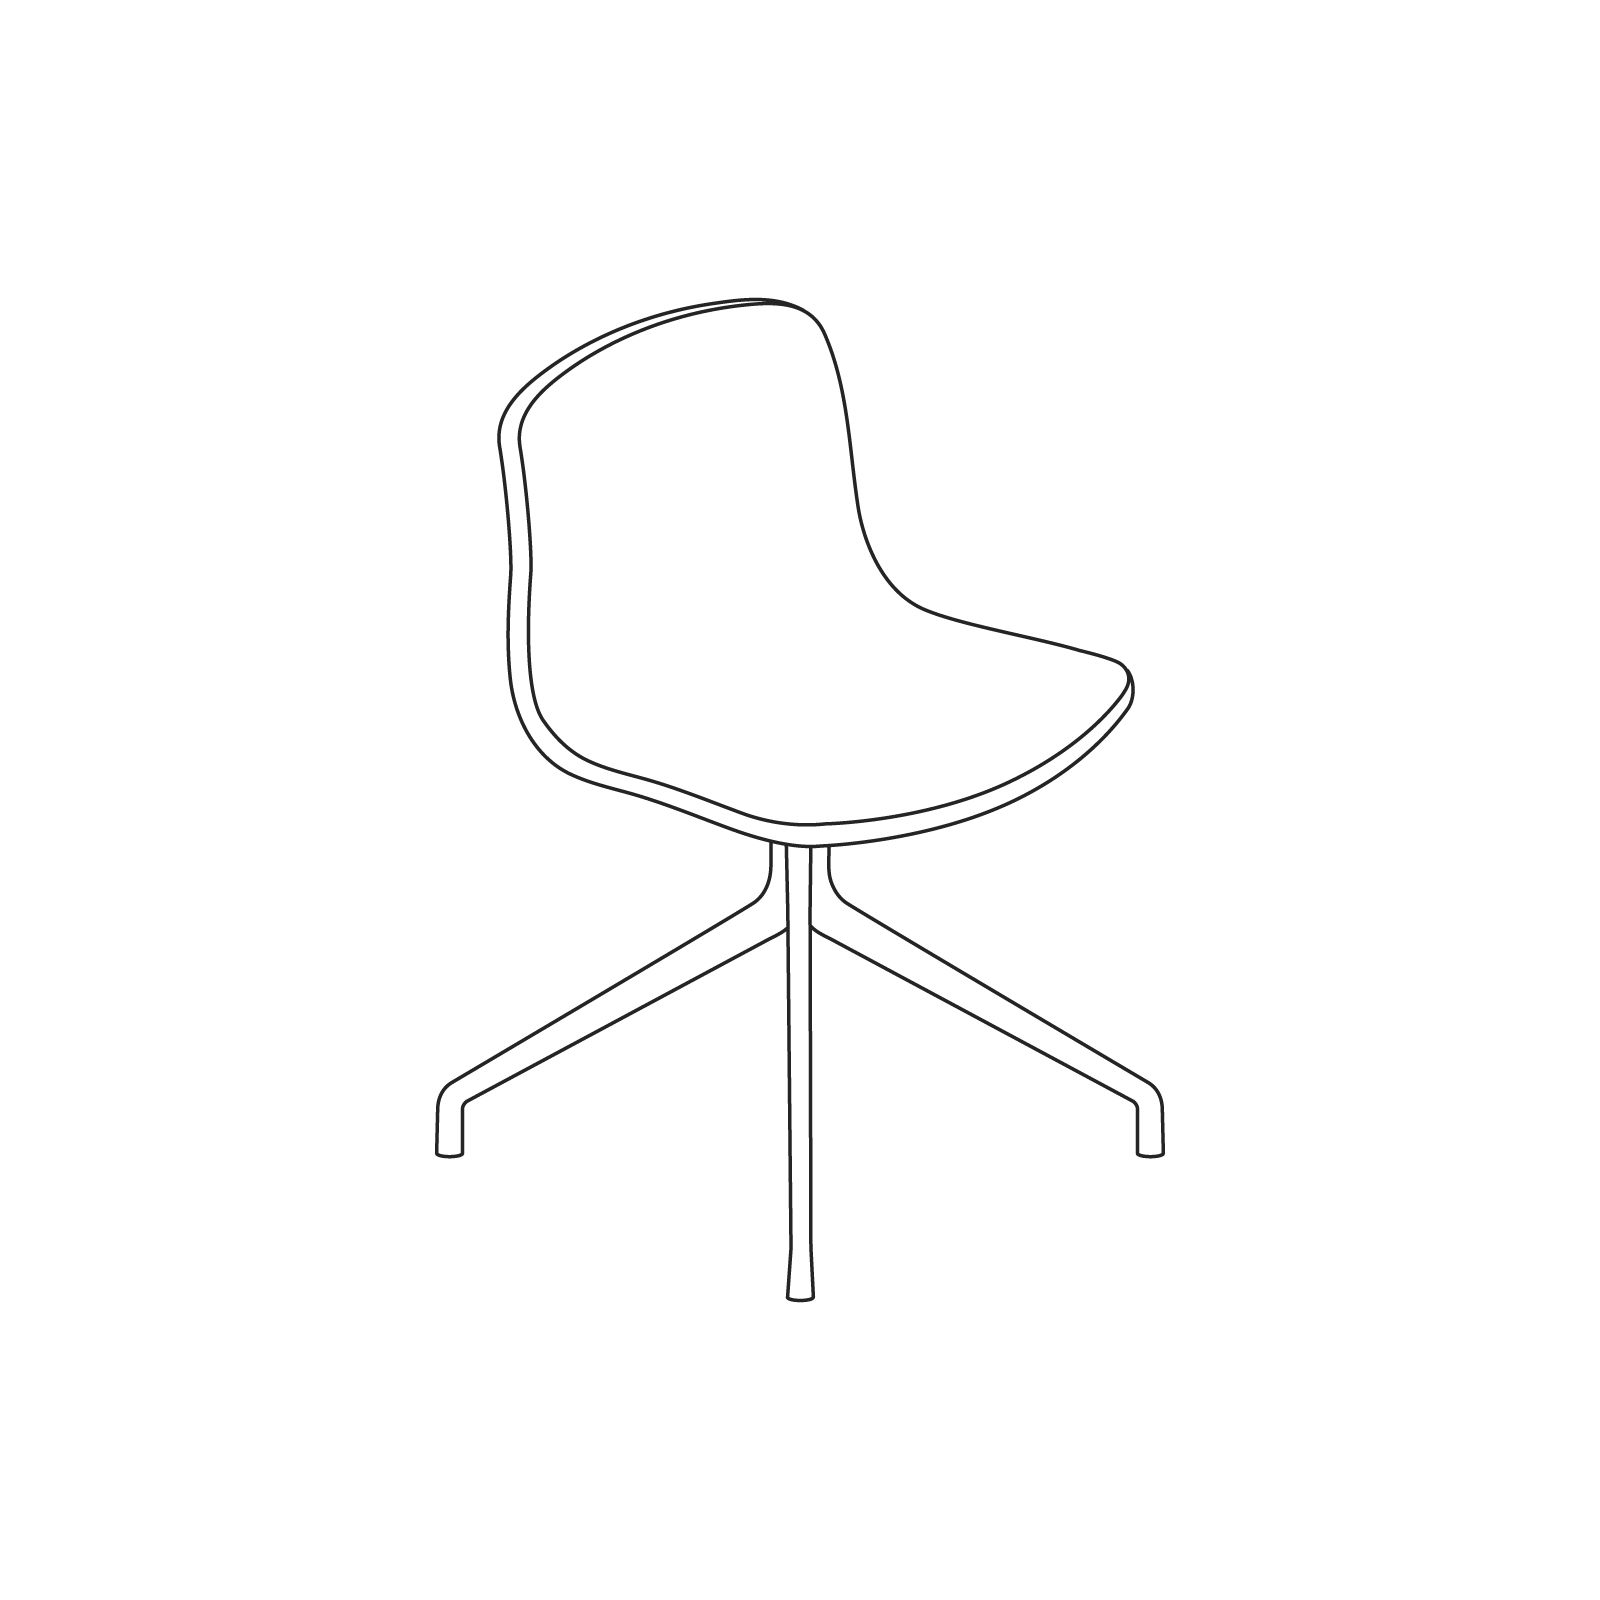 A line drawing - About A Chair–Armless–4-Star Swivel Base (AAC10, AAC11)